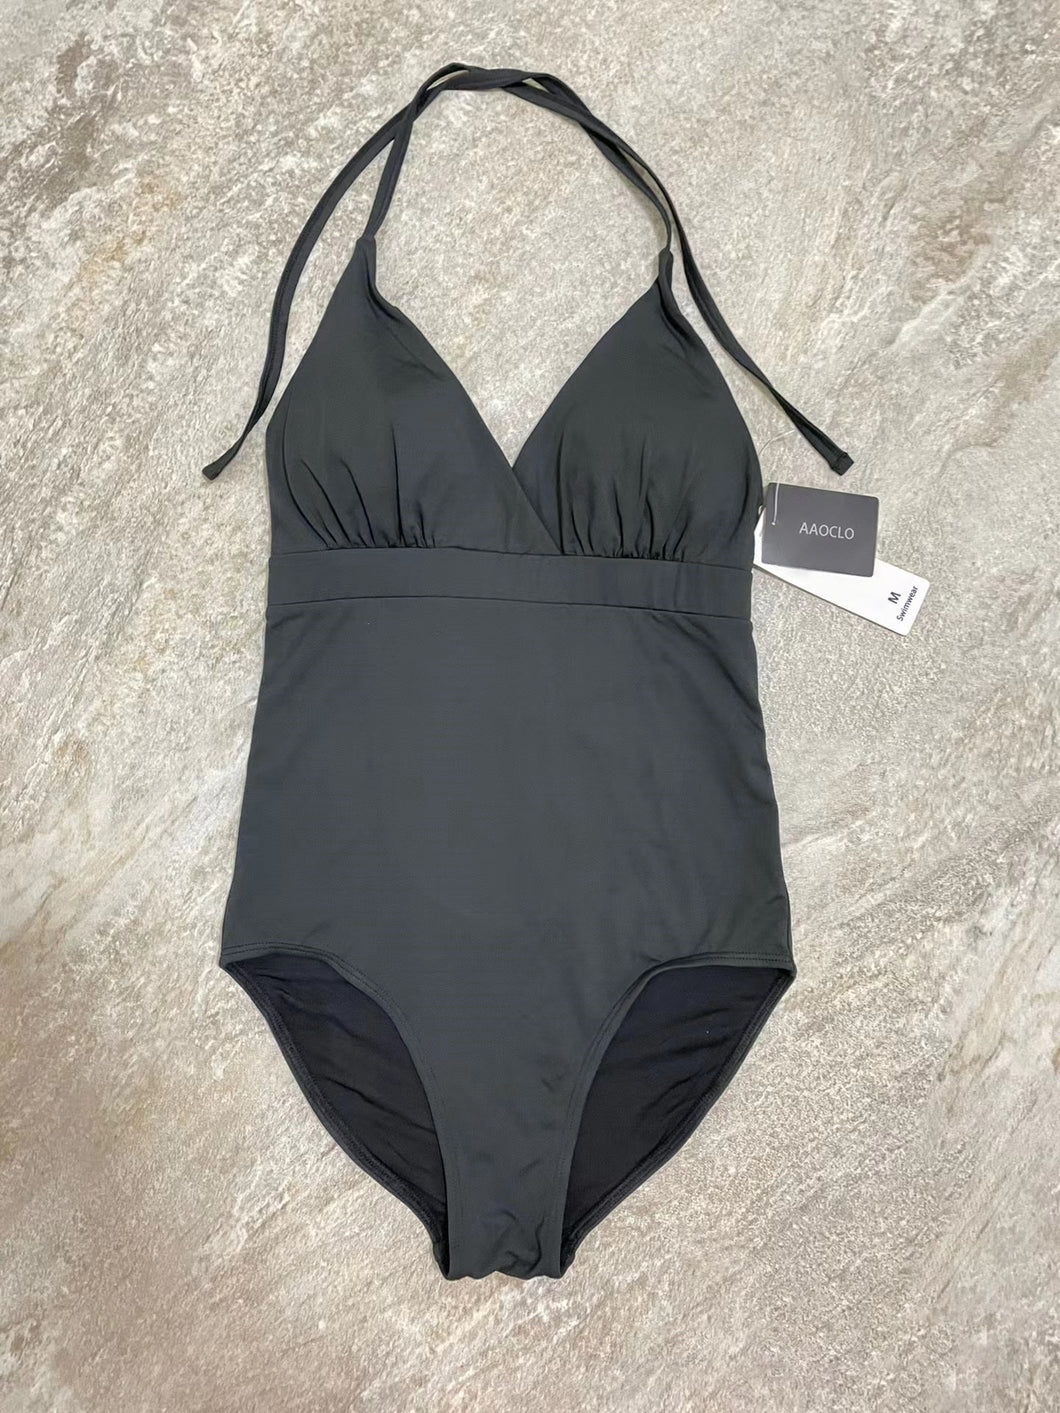 AAOCLO Swimwear,solid black sexy one piece swimsuit for women